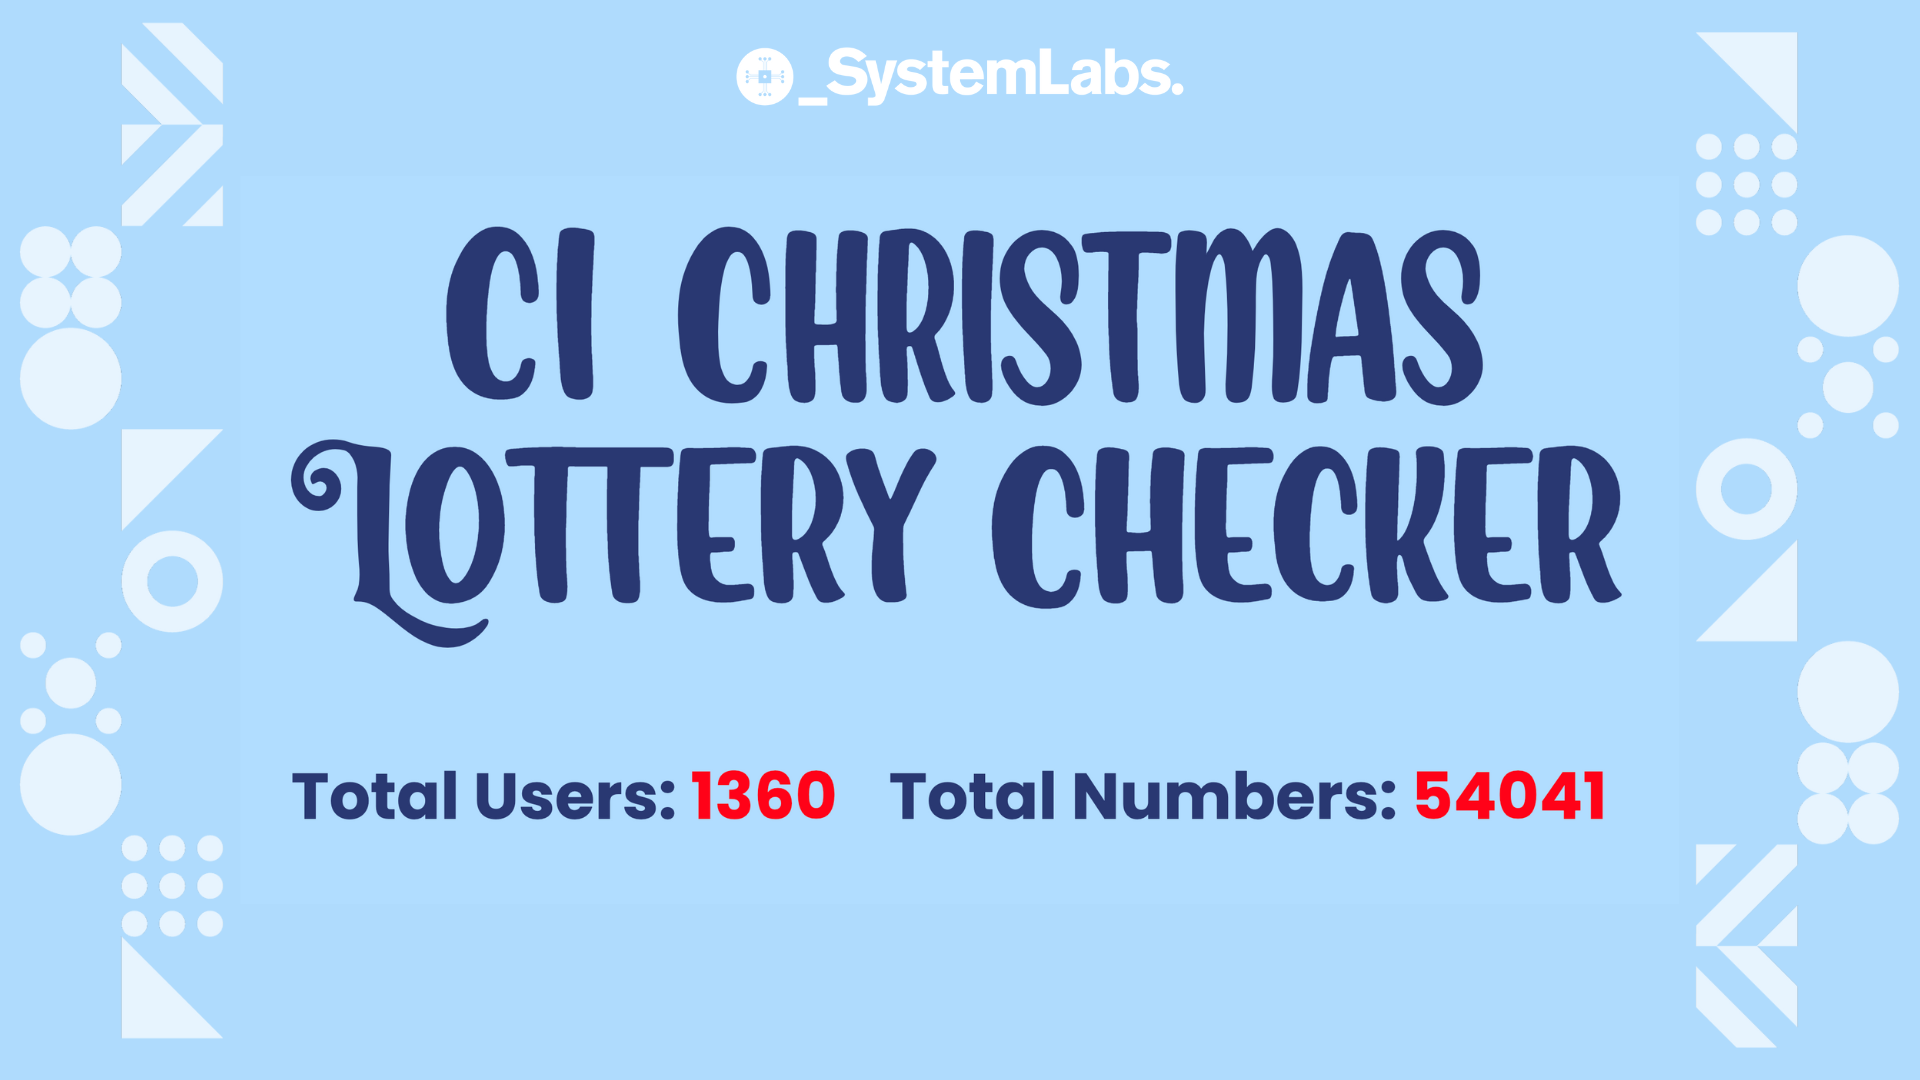 SystemLabs’ CI Island Lottery Checker Web App Used to Check Over 50,000 Numbers